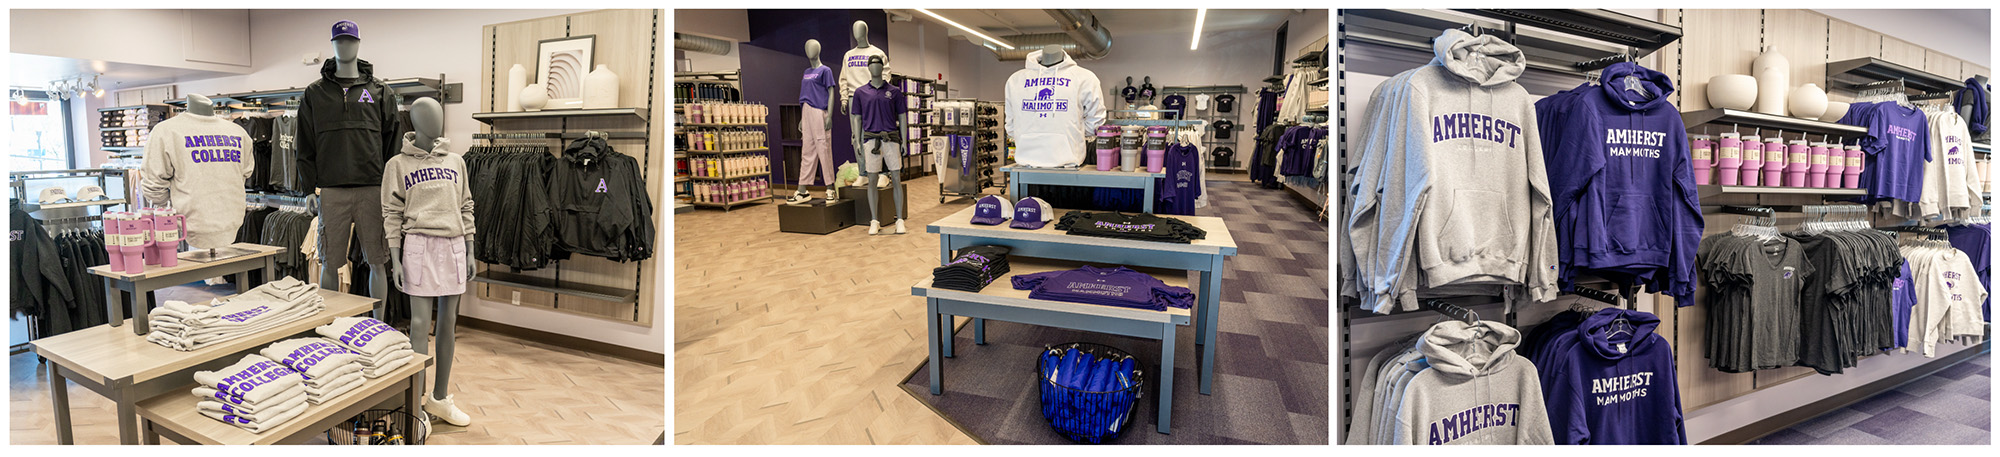 Three views of a retail store showing Amherst College merchandise